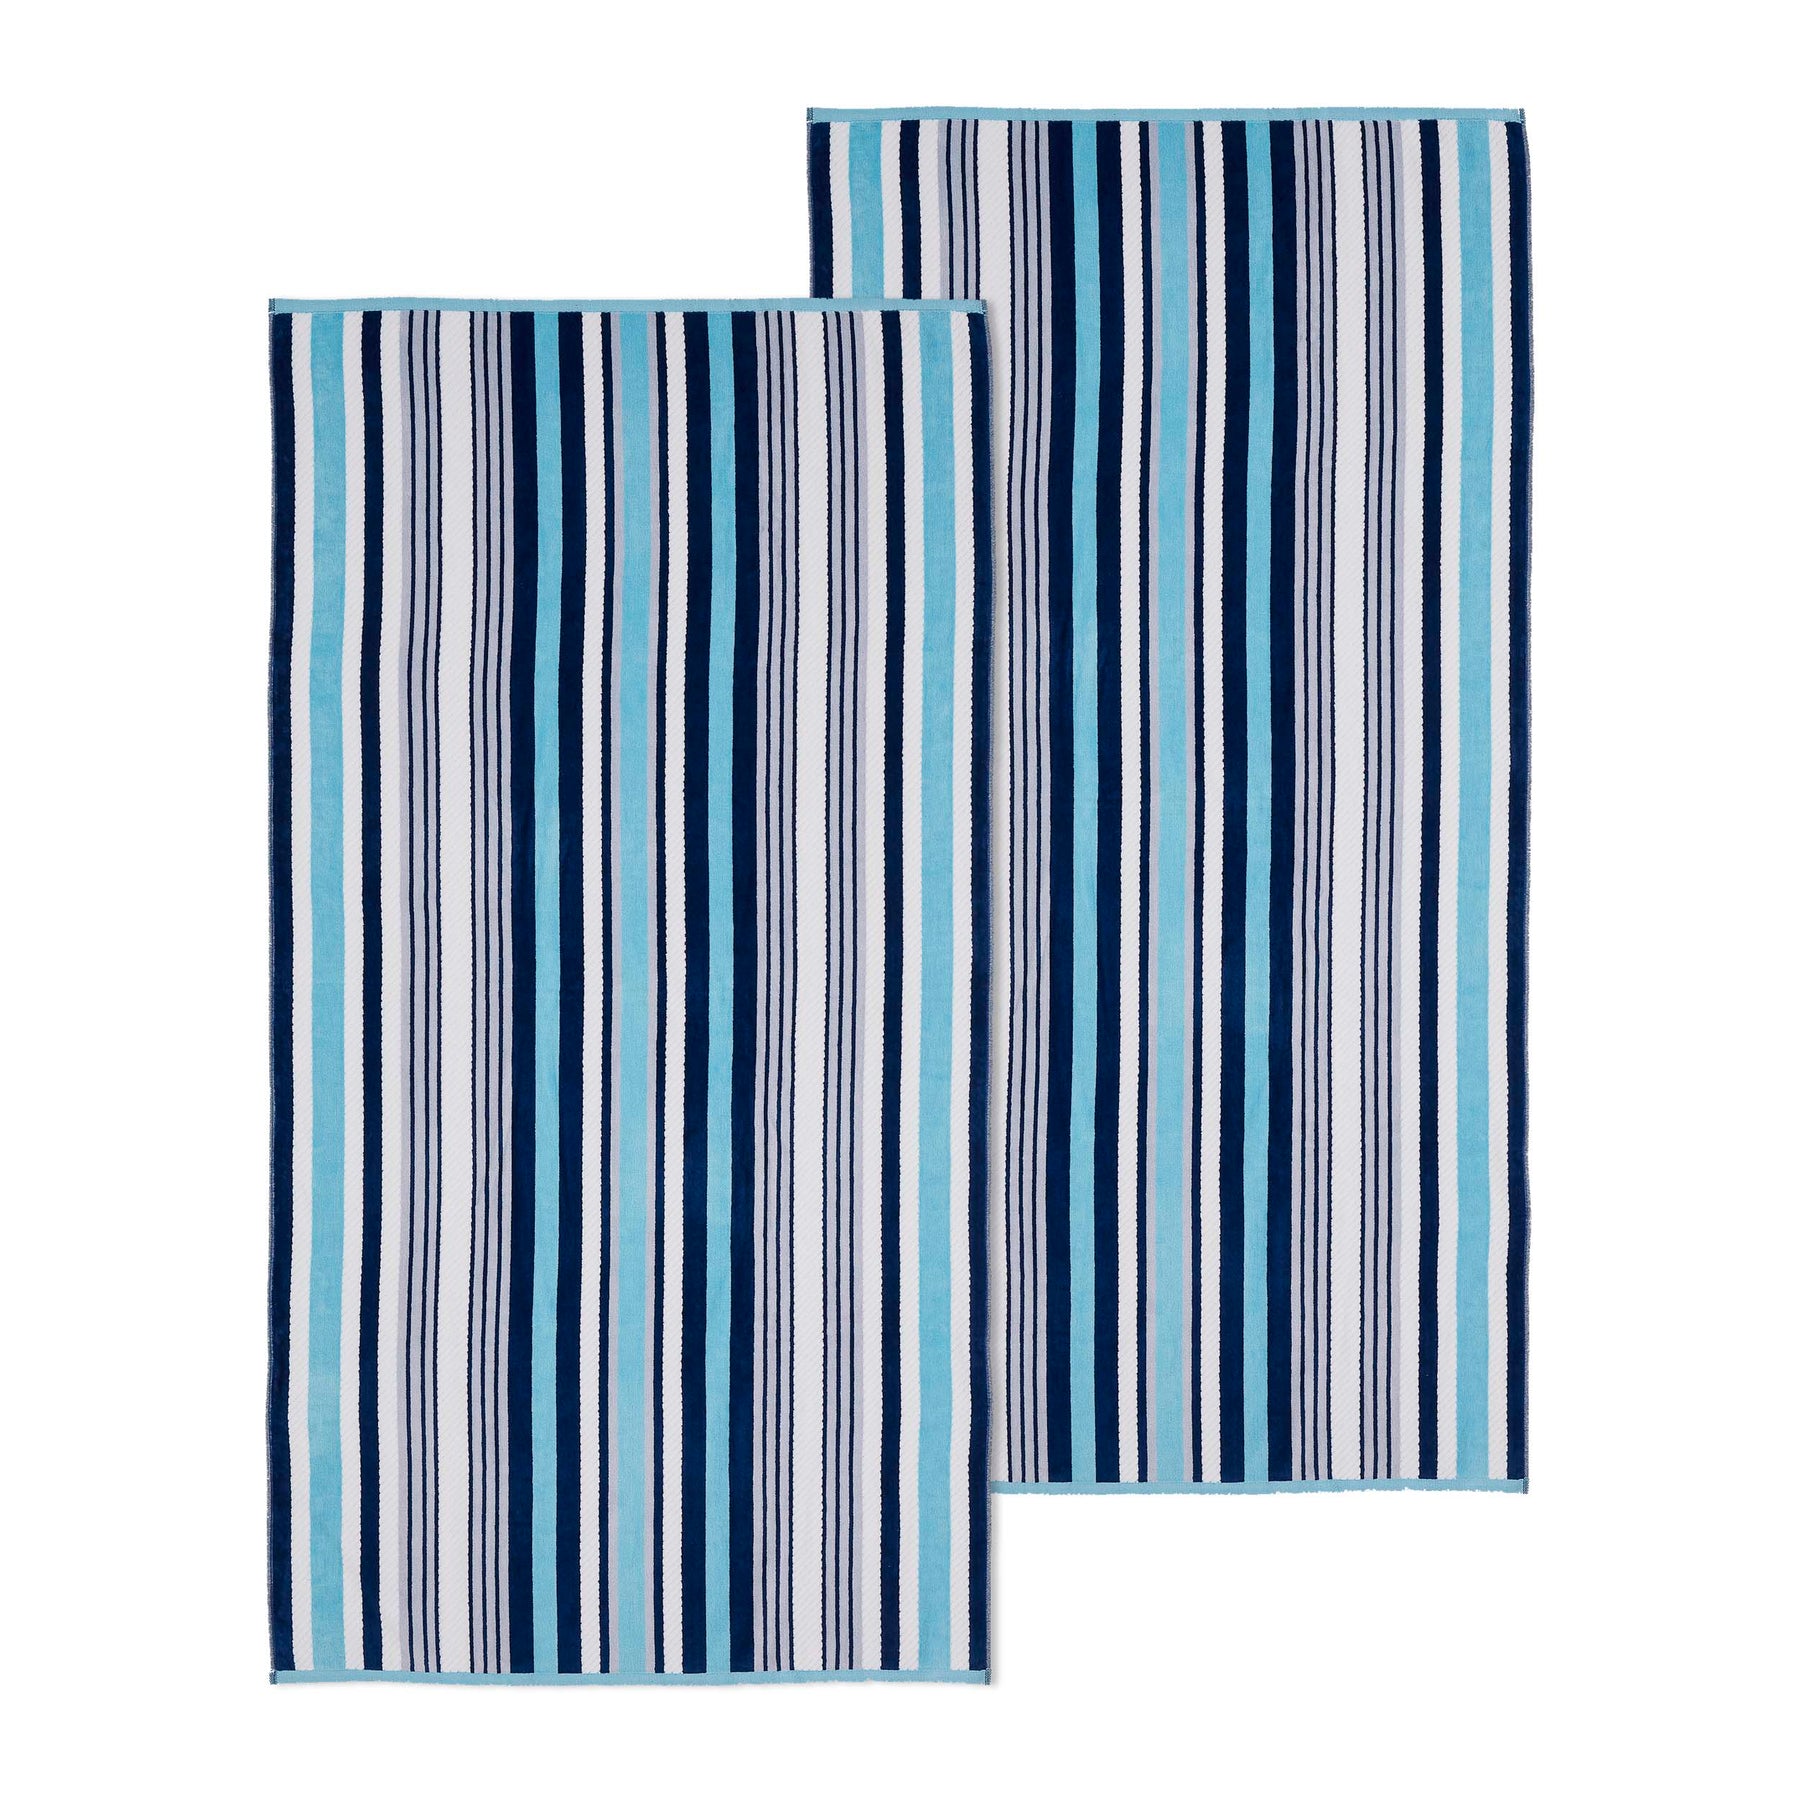 2 Piece Rope Textured Striped Oversized Cotton Beach Towel Set - SkyBlue